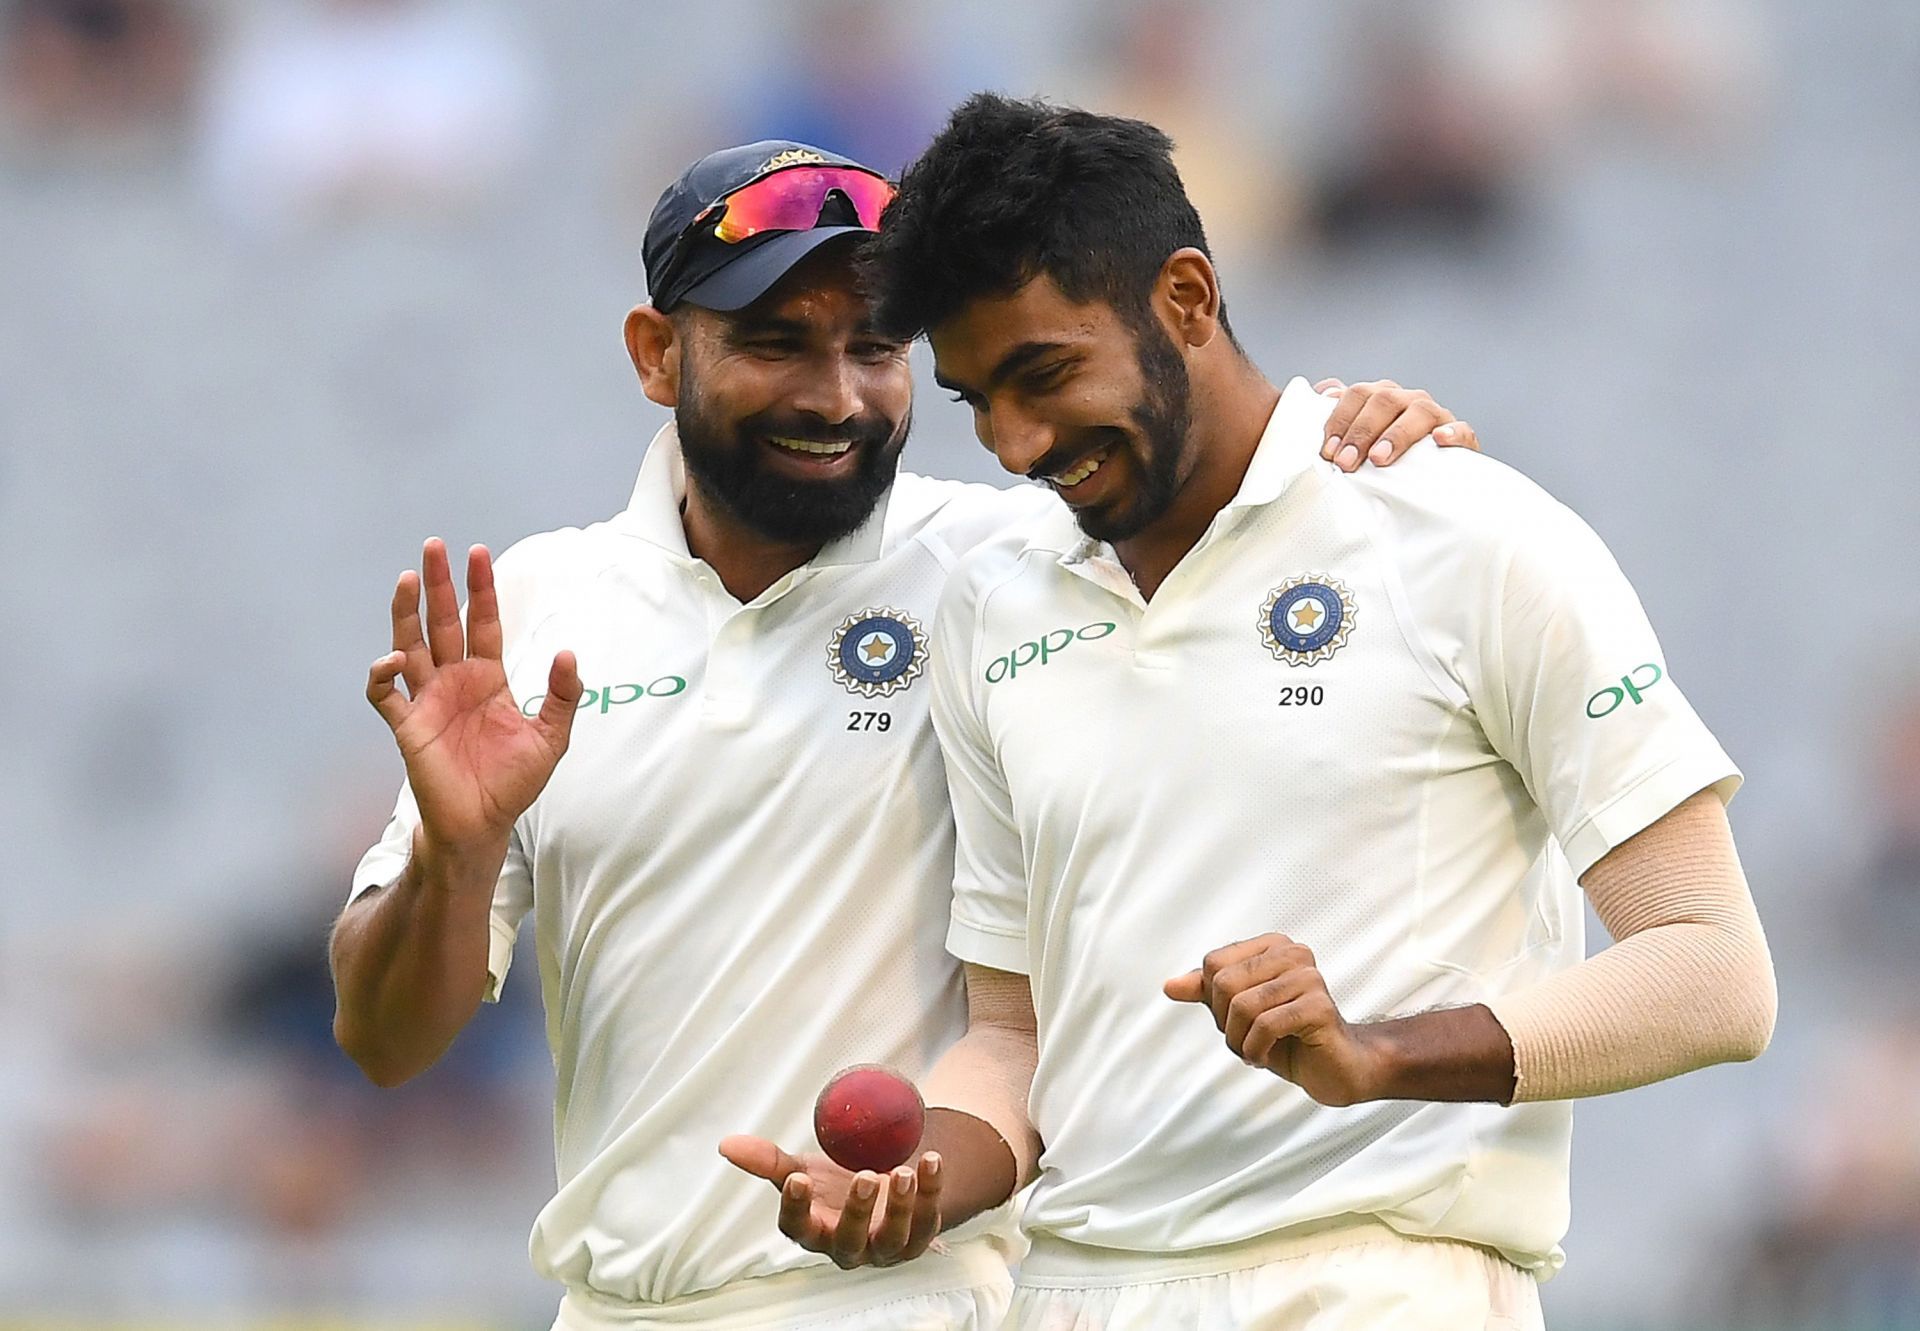 Mohammed Shami and Jasprit Bumrah played the perfect supporting act for Shardul Thakur